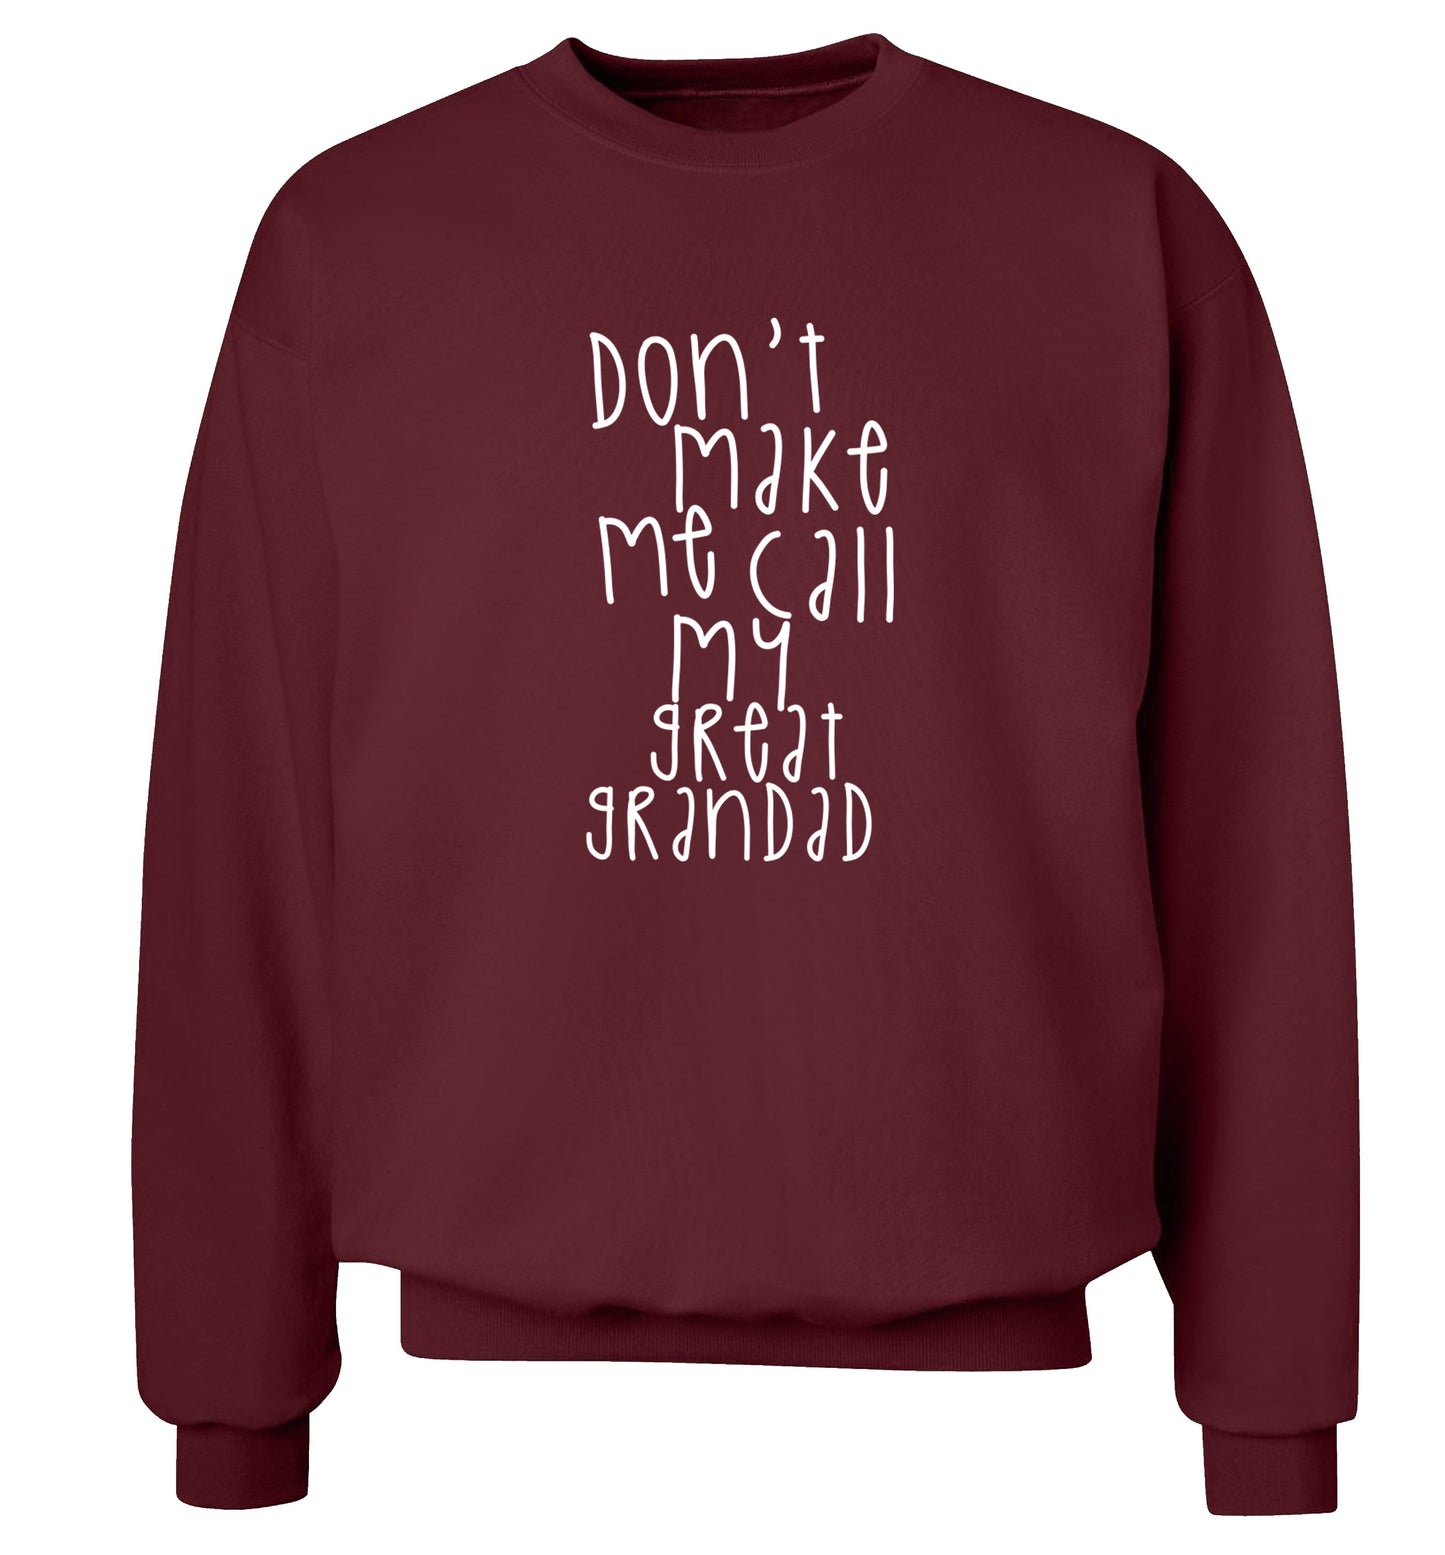 Don't make me call my great grandad Adult's unisex maroon Sweater 2XL